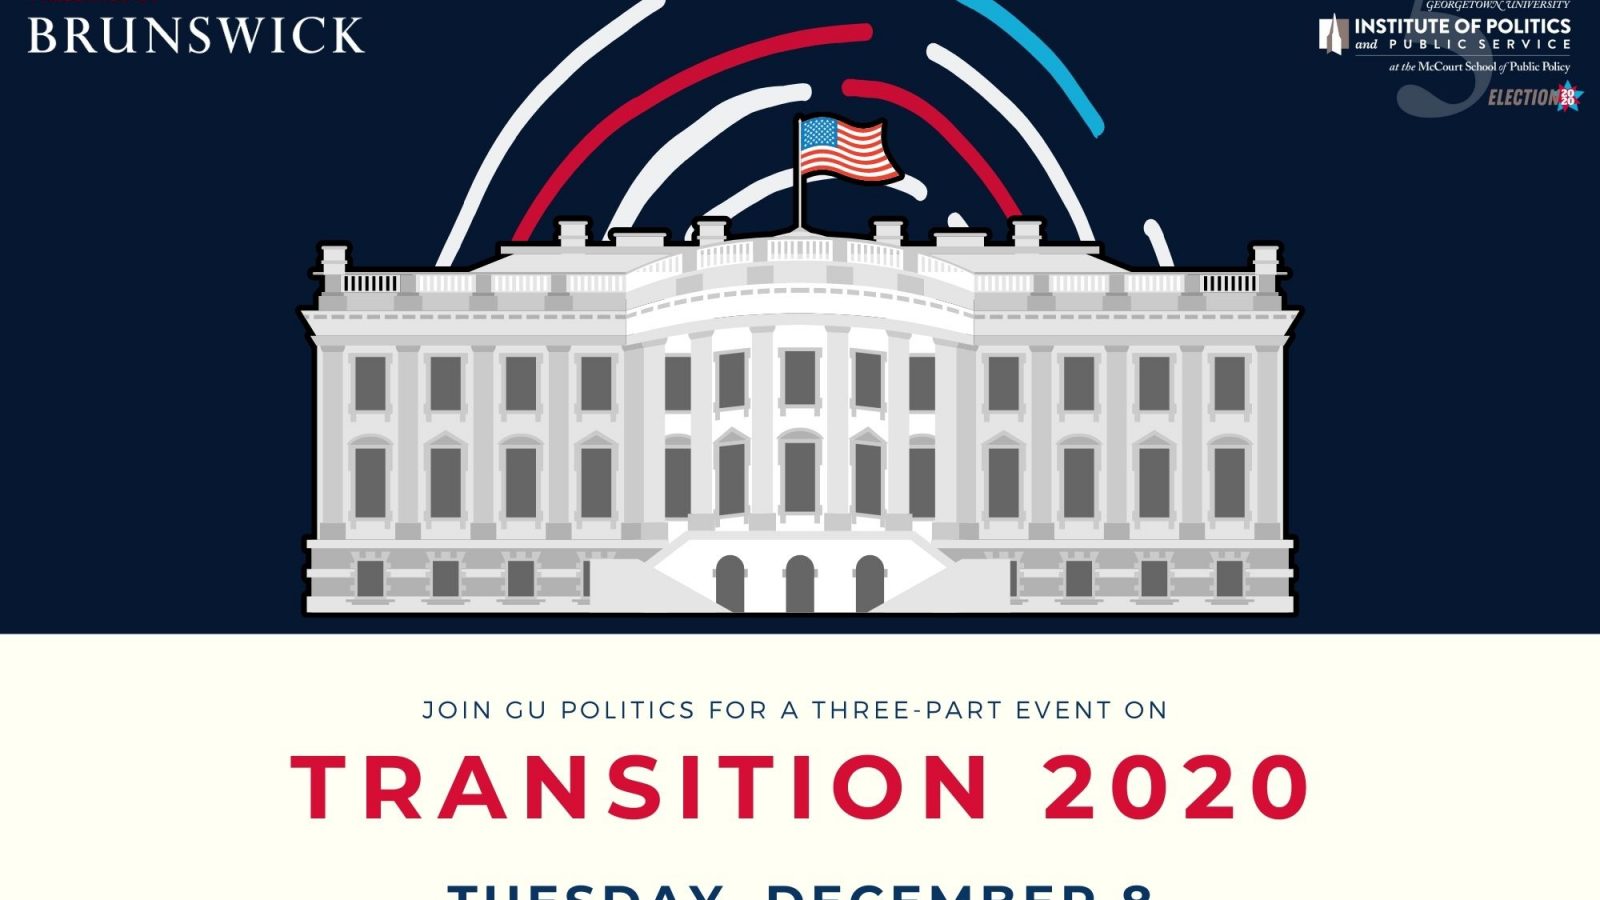 Georgetown Institute of Politics and Public Service (GU Politics) on Tuesday, December 8 for a three-part event, “Transition 2020,” presented by Brunswick Group.